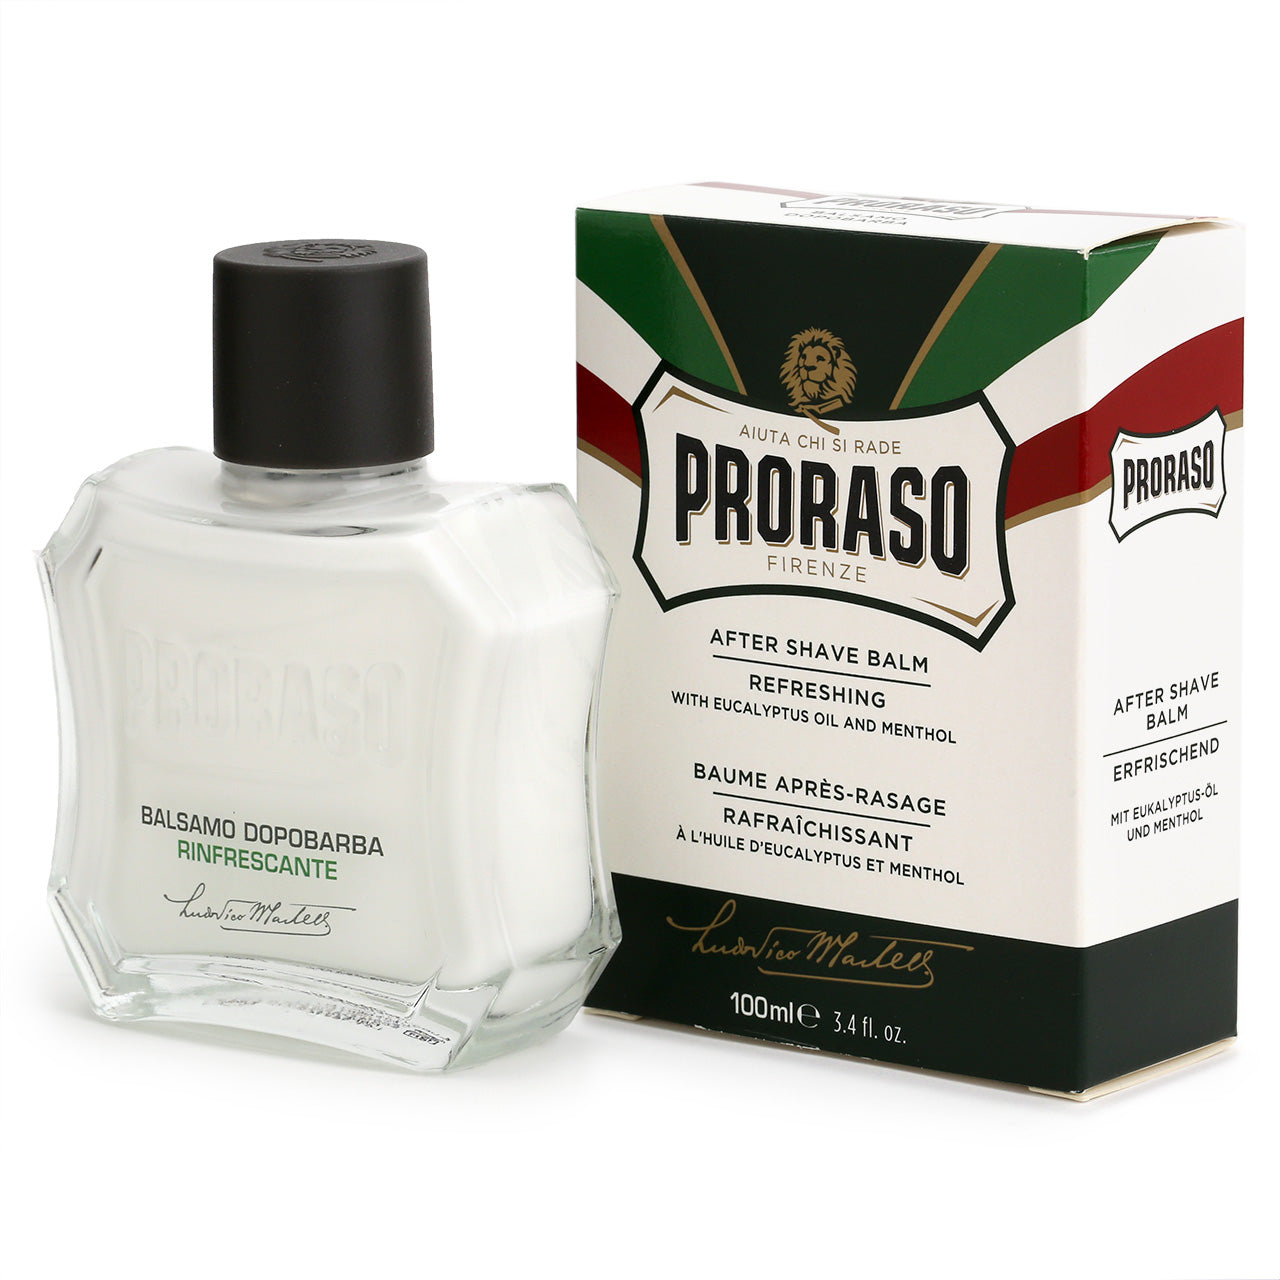 Proraso AS Balm Refreshing with Eucalyptus Oil & Menthol is in a retro bottle and box